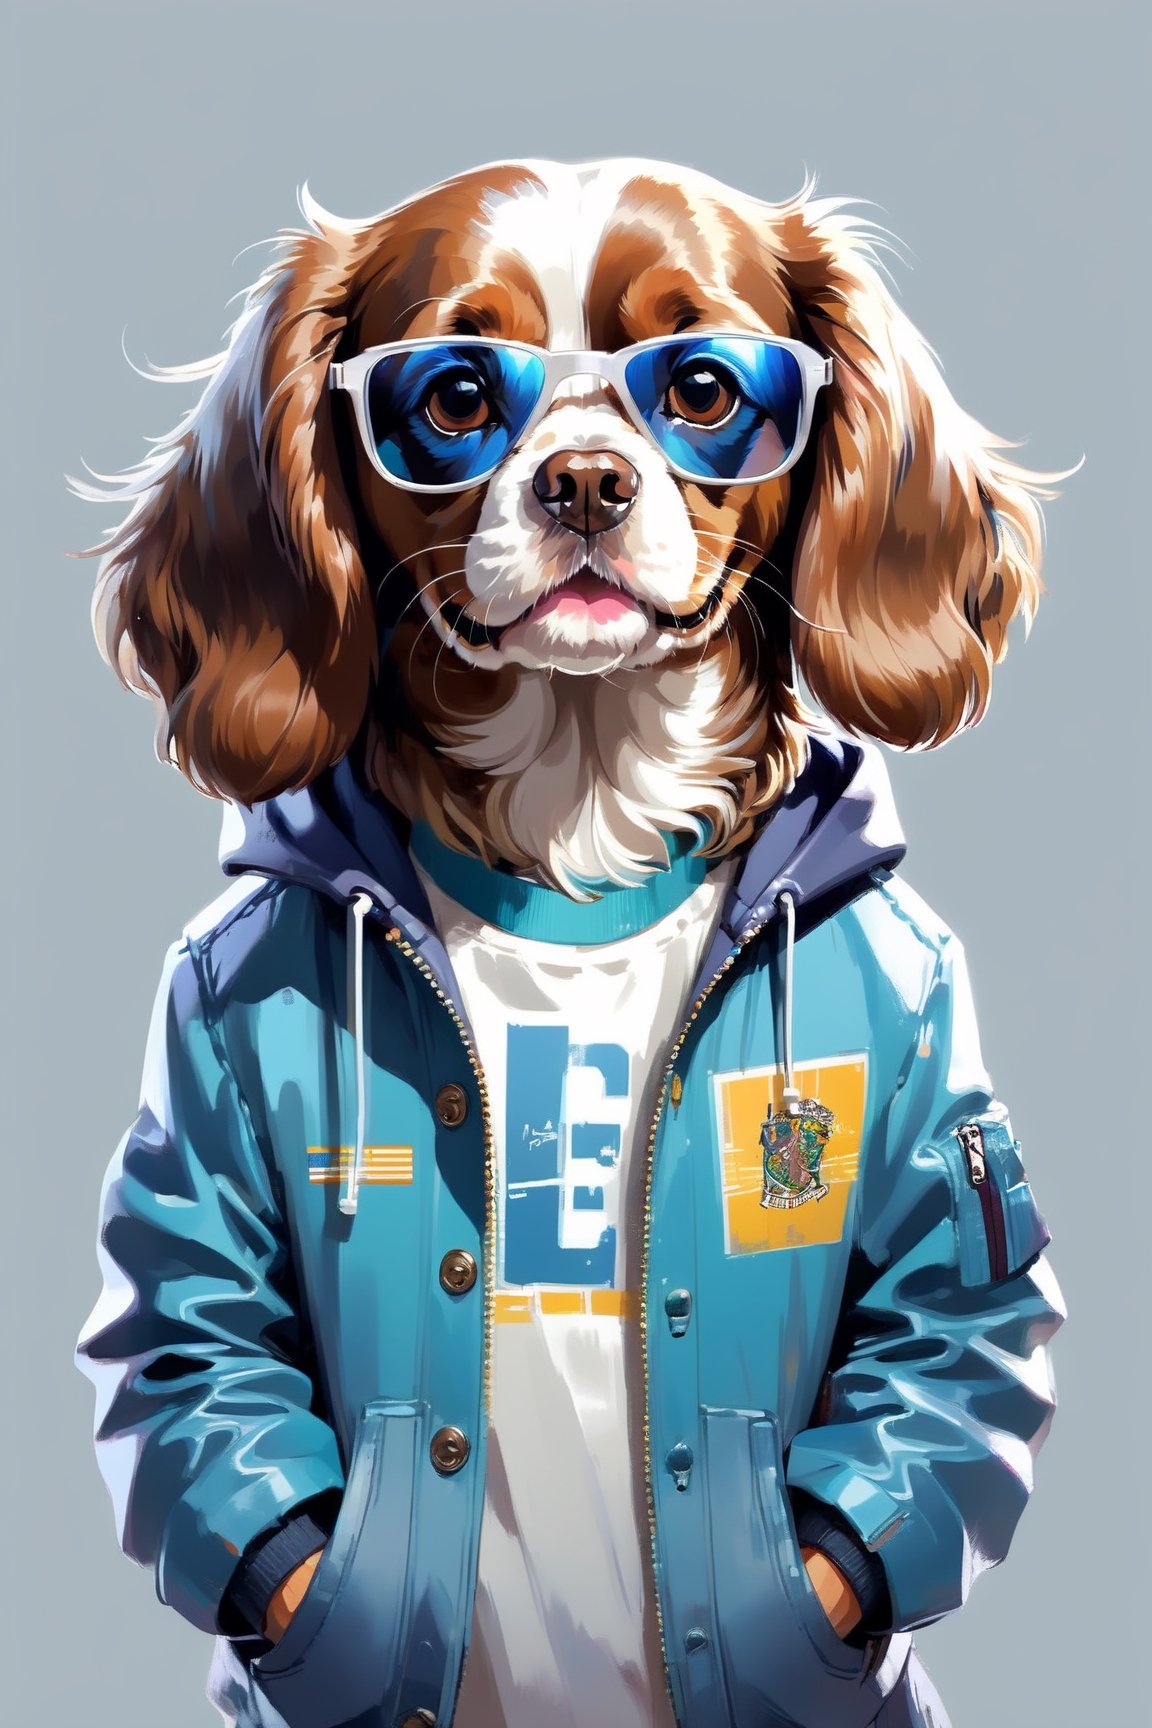 Perfect centering, Cute brown english cokker spaniel, Wear a student team jacket, Wearing sunglasses, Wearing headphones, cheerfulness, Standing position, Abstract beauty, Centered, Looking at the camera, Facing the camera, Approaching perfection, Dynamic, Highly detailed, Smooth, Sharp Focus, 8K, hight resolution, Illustration, art by carne griffiths and wadim kashin, White background